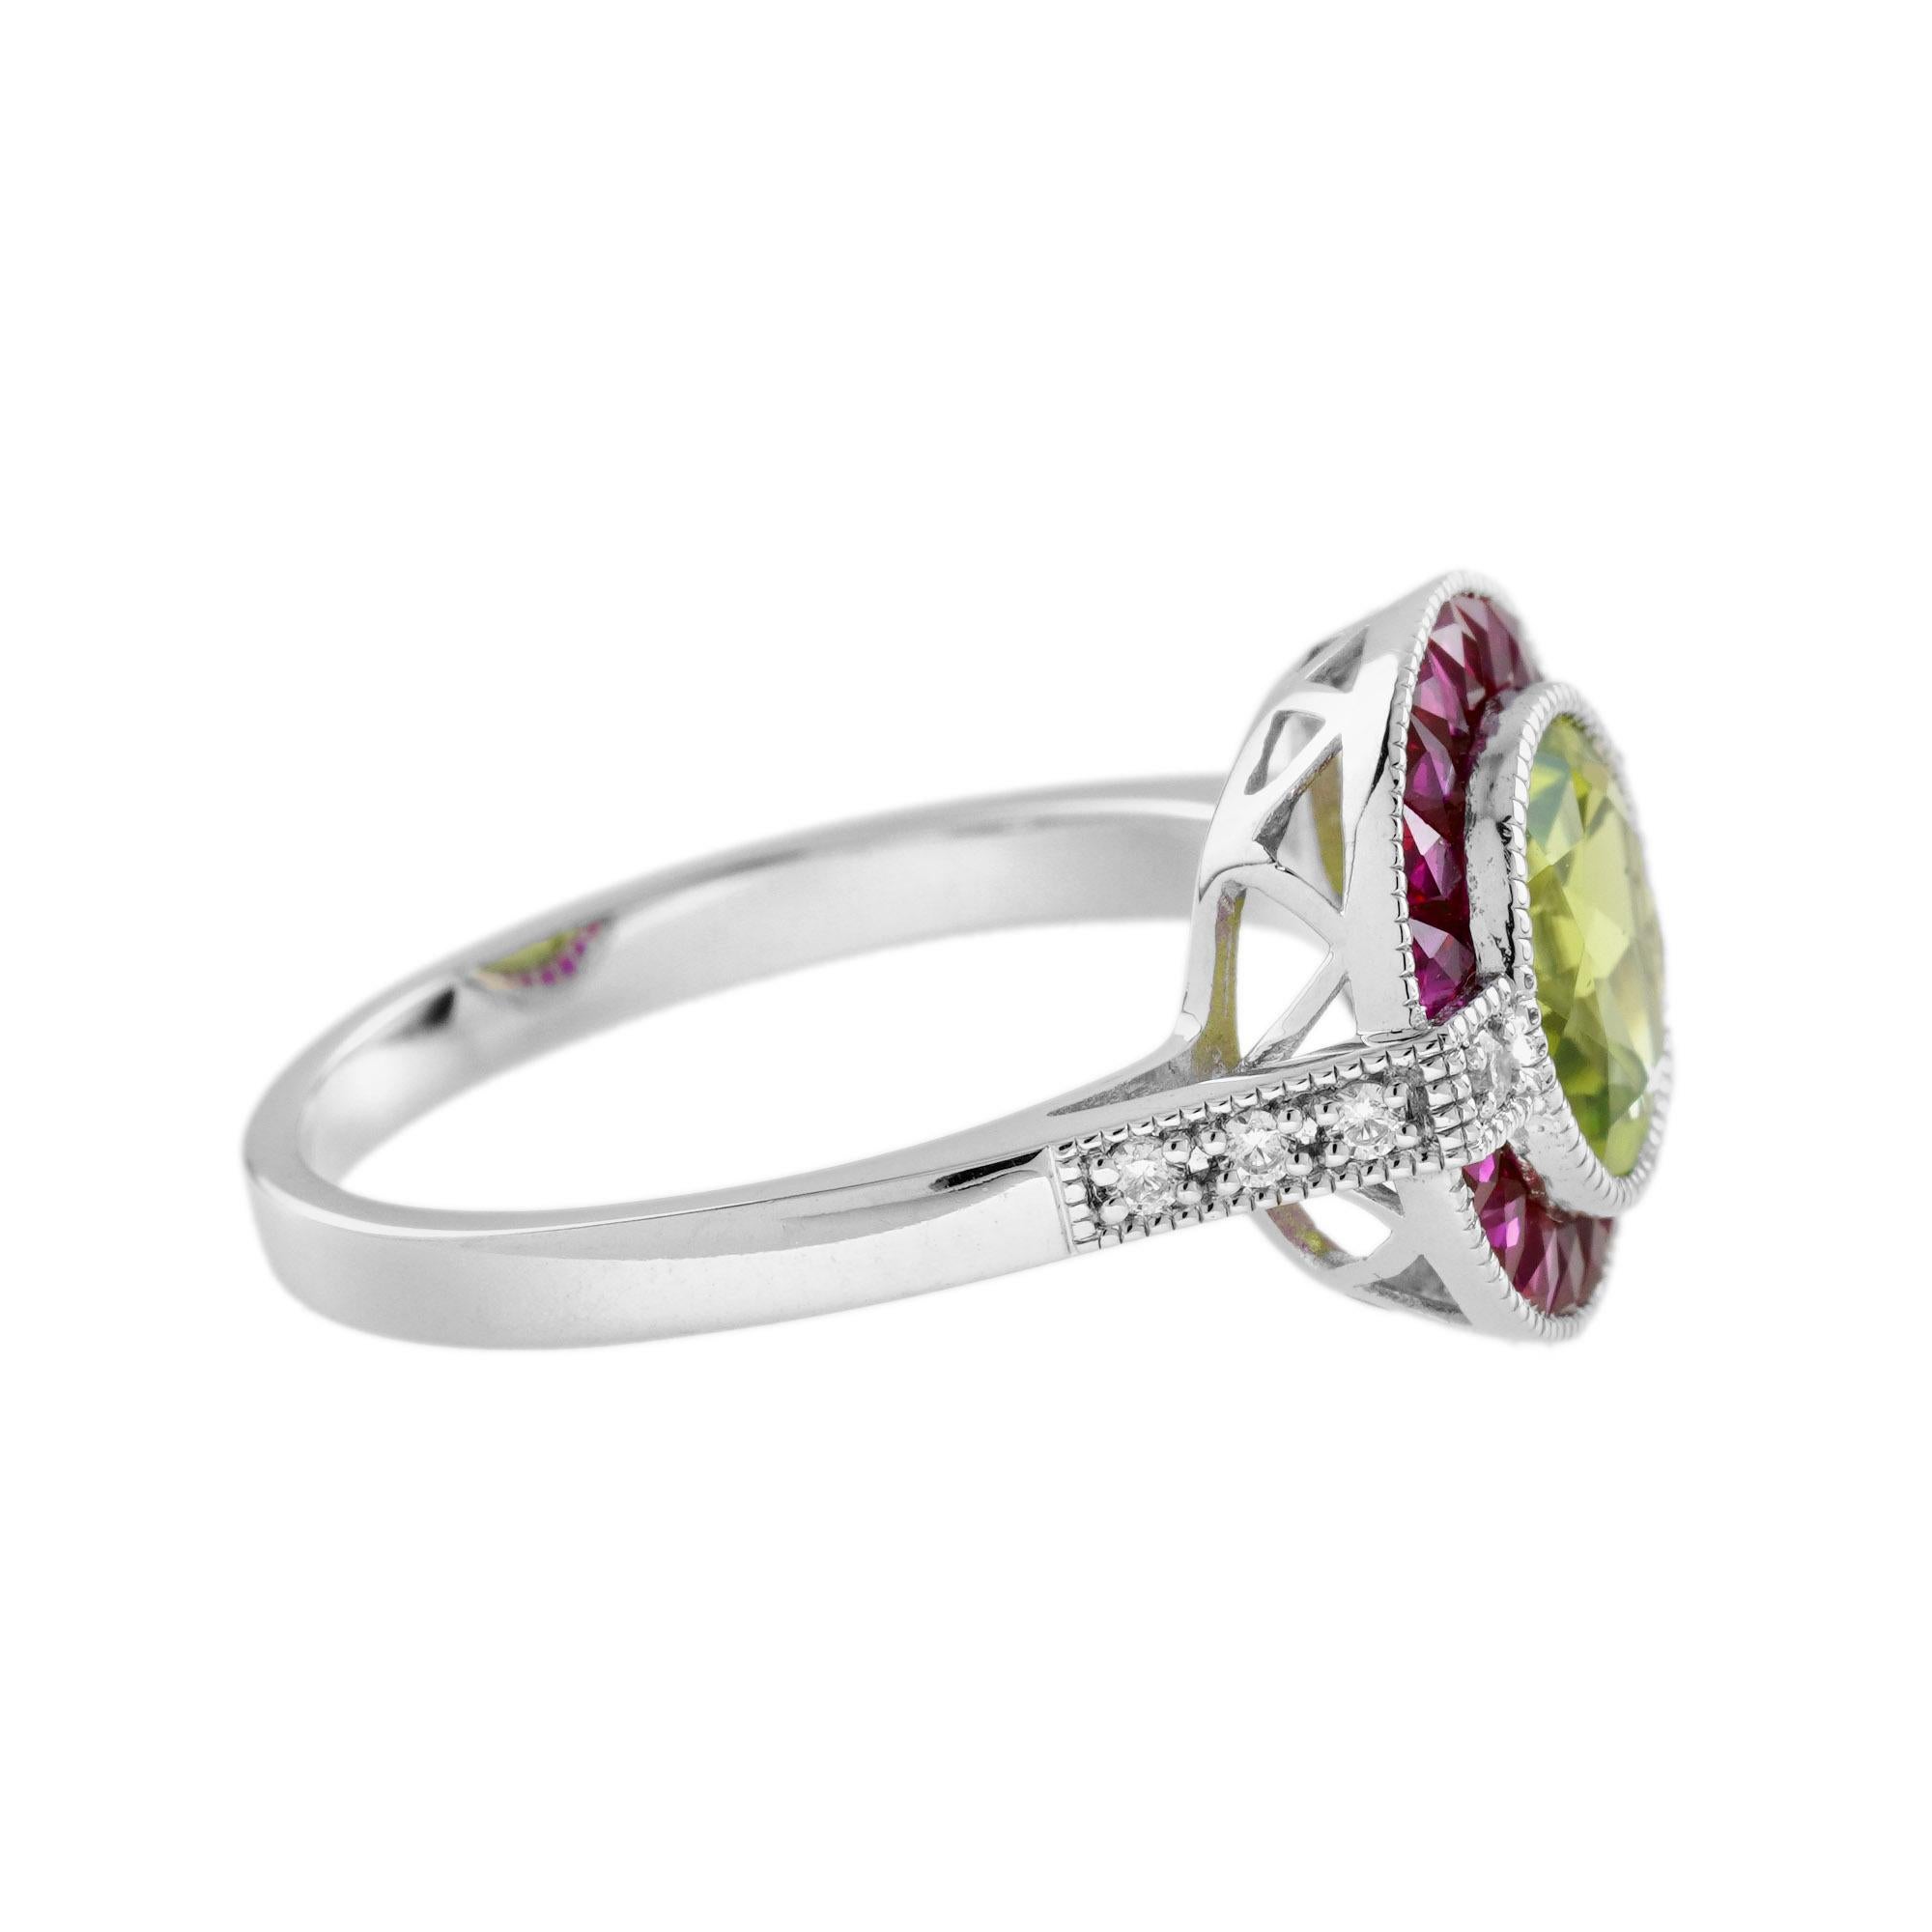 For Sale:  Peridot Ruby Diamond Art Deco Style Celebrate Target Ring in 14K White Gold 4